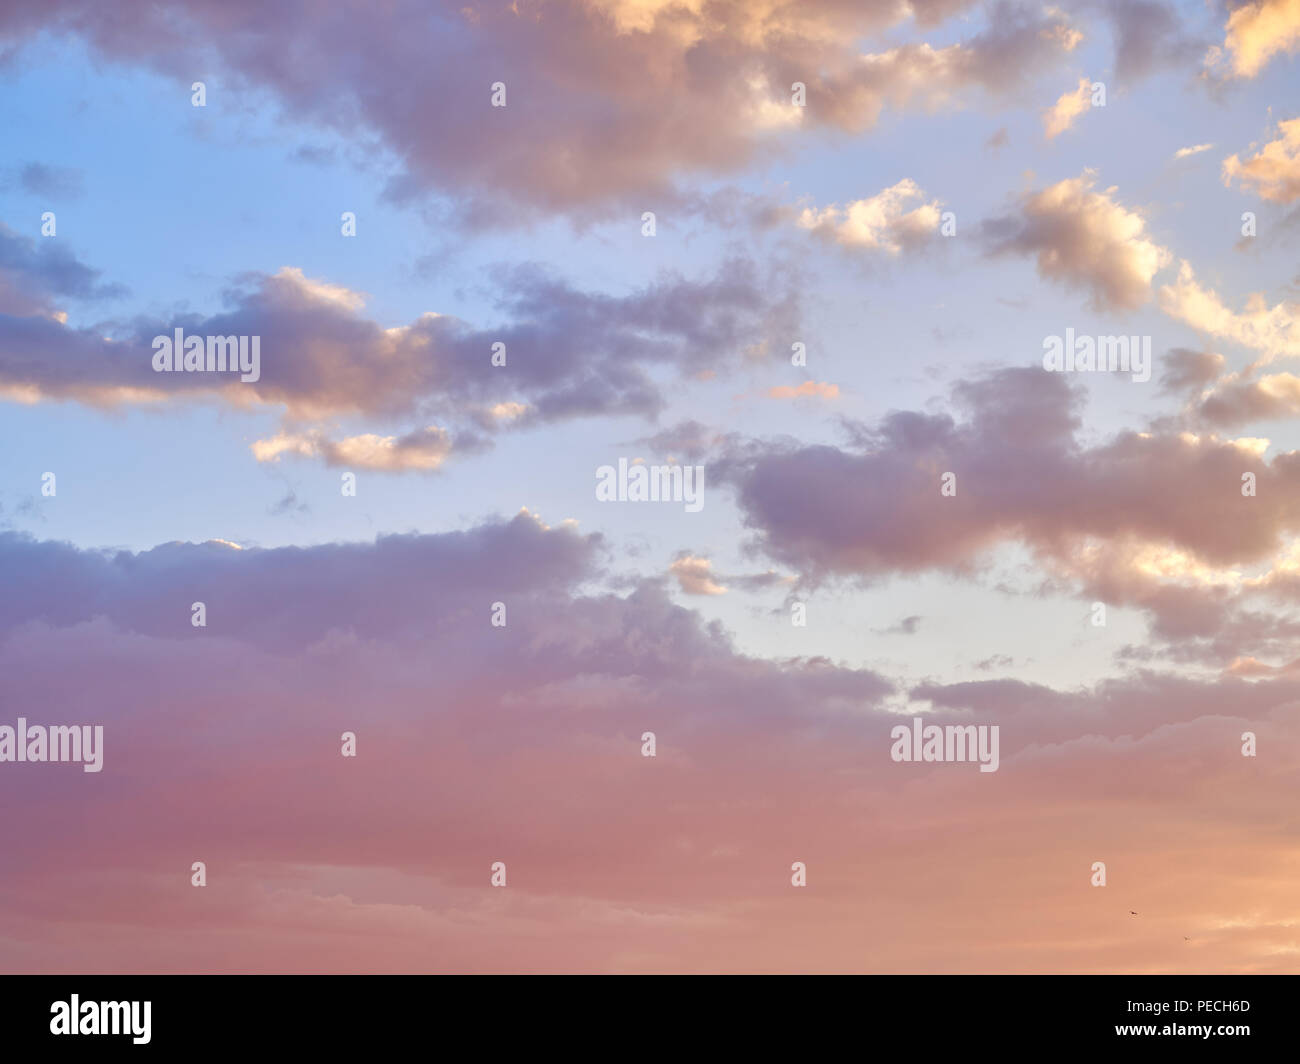 Colorful sky with clouds background. Stock Photo